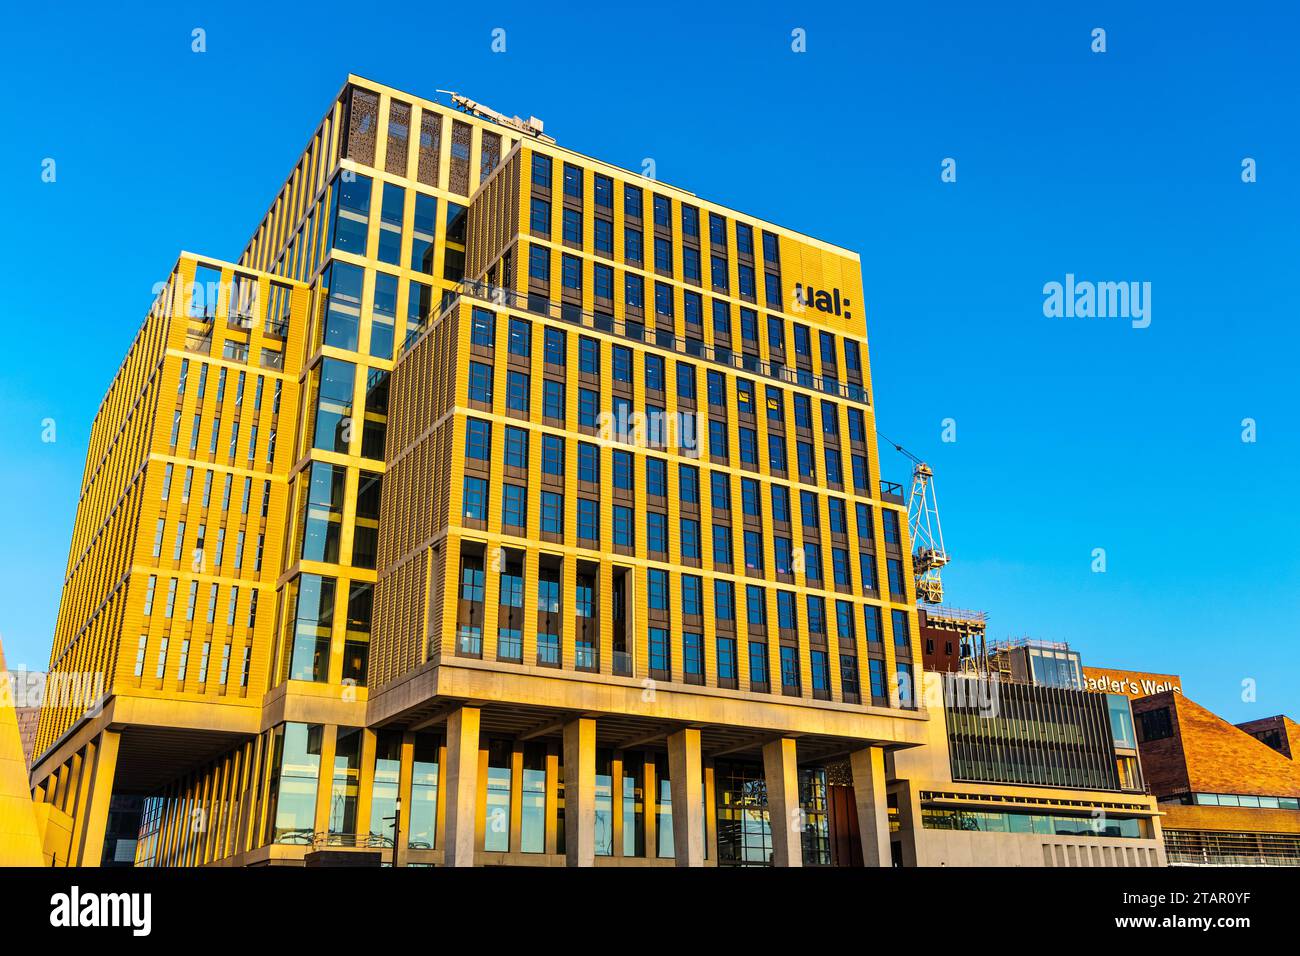 Exterior of the new University of the Arts London College of Fashion building, Stratford, London, England Stock Photo